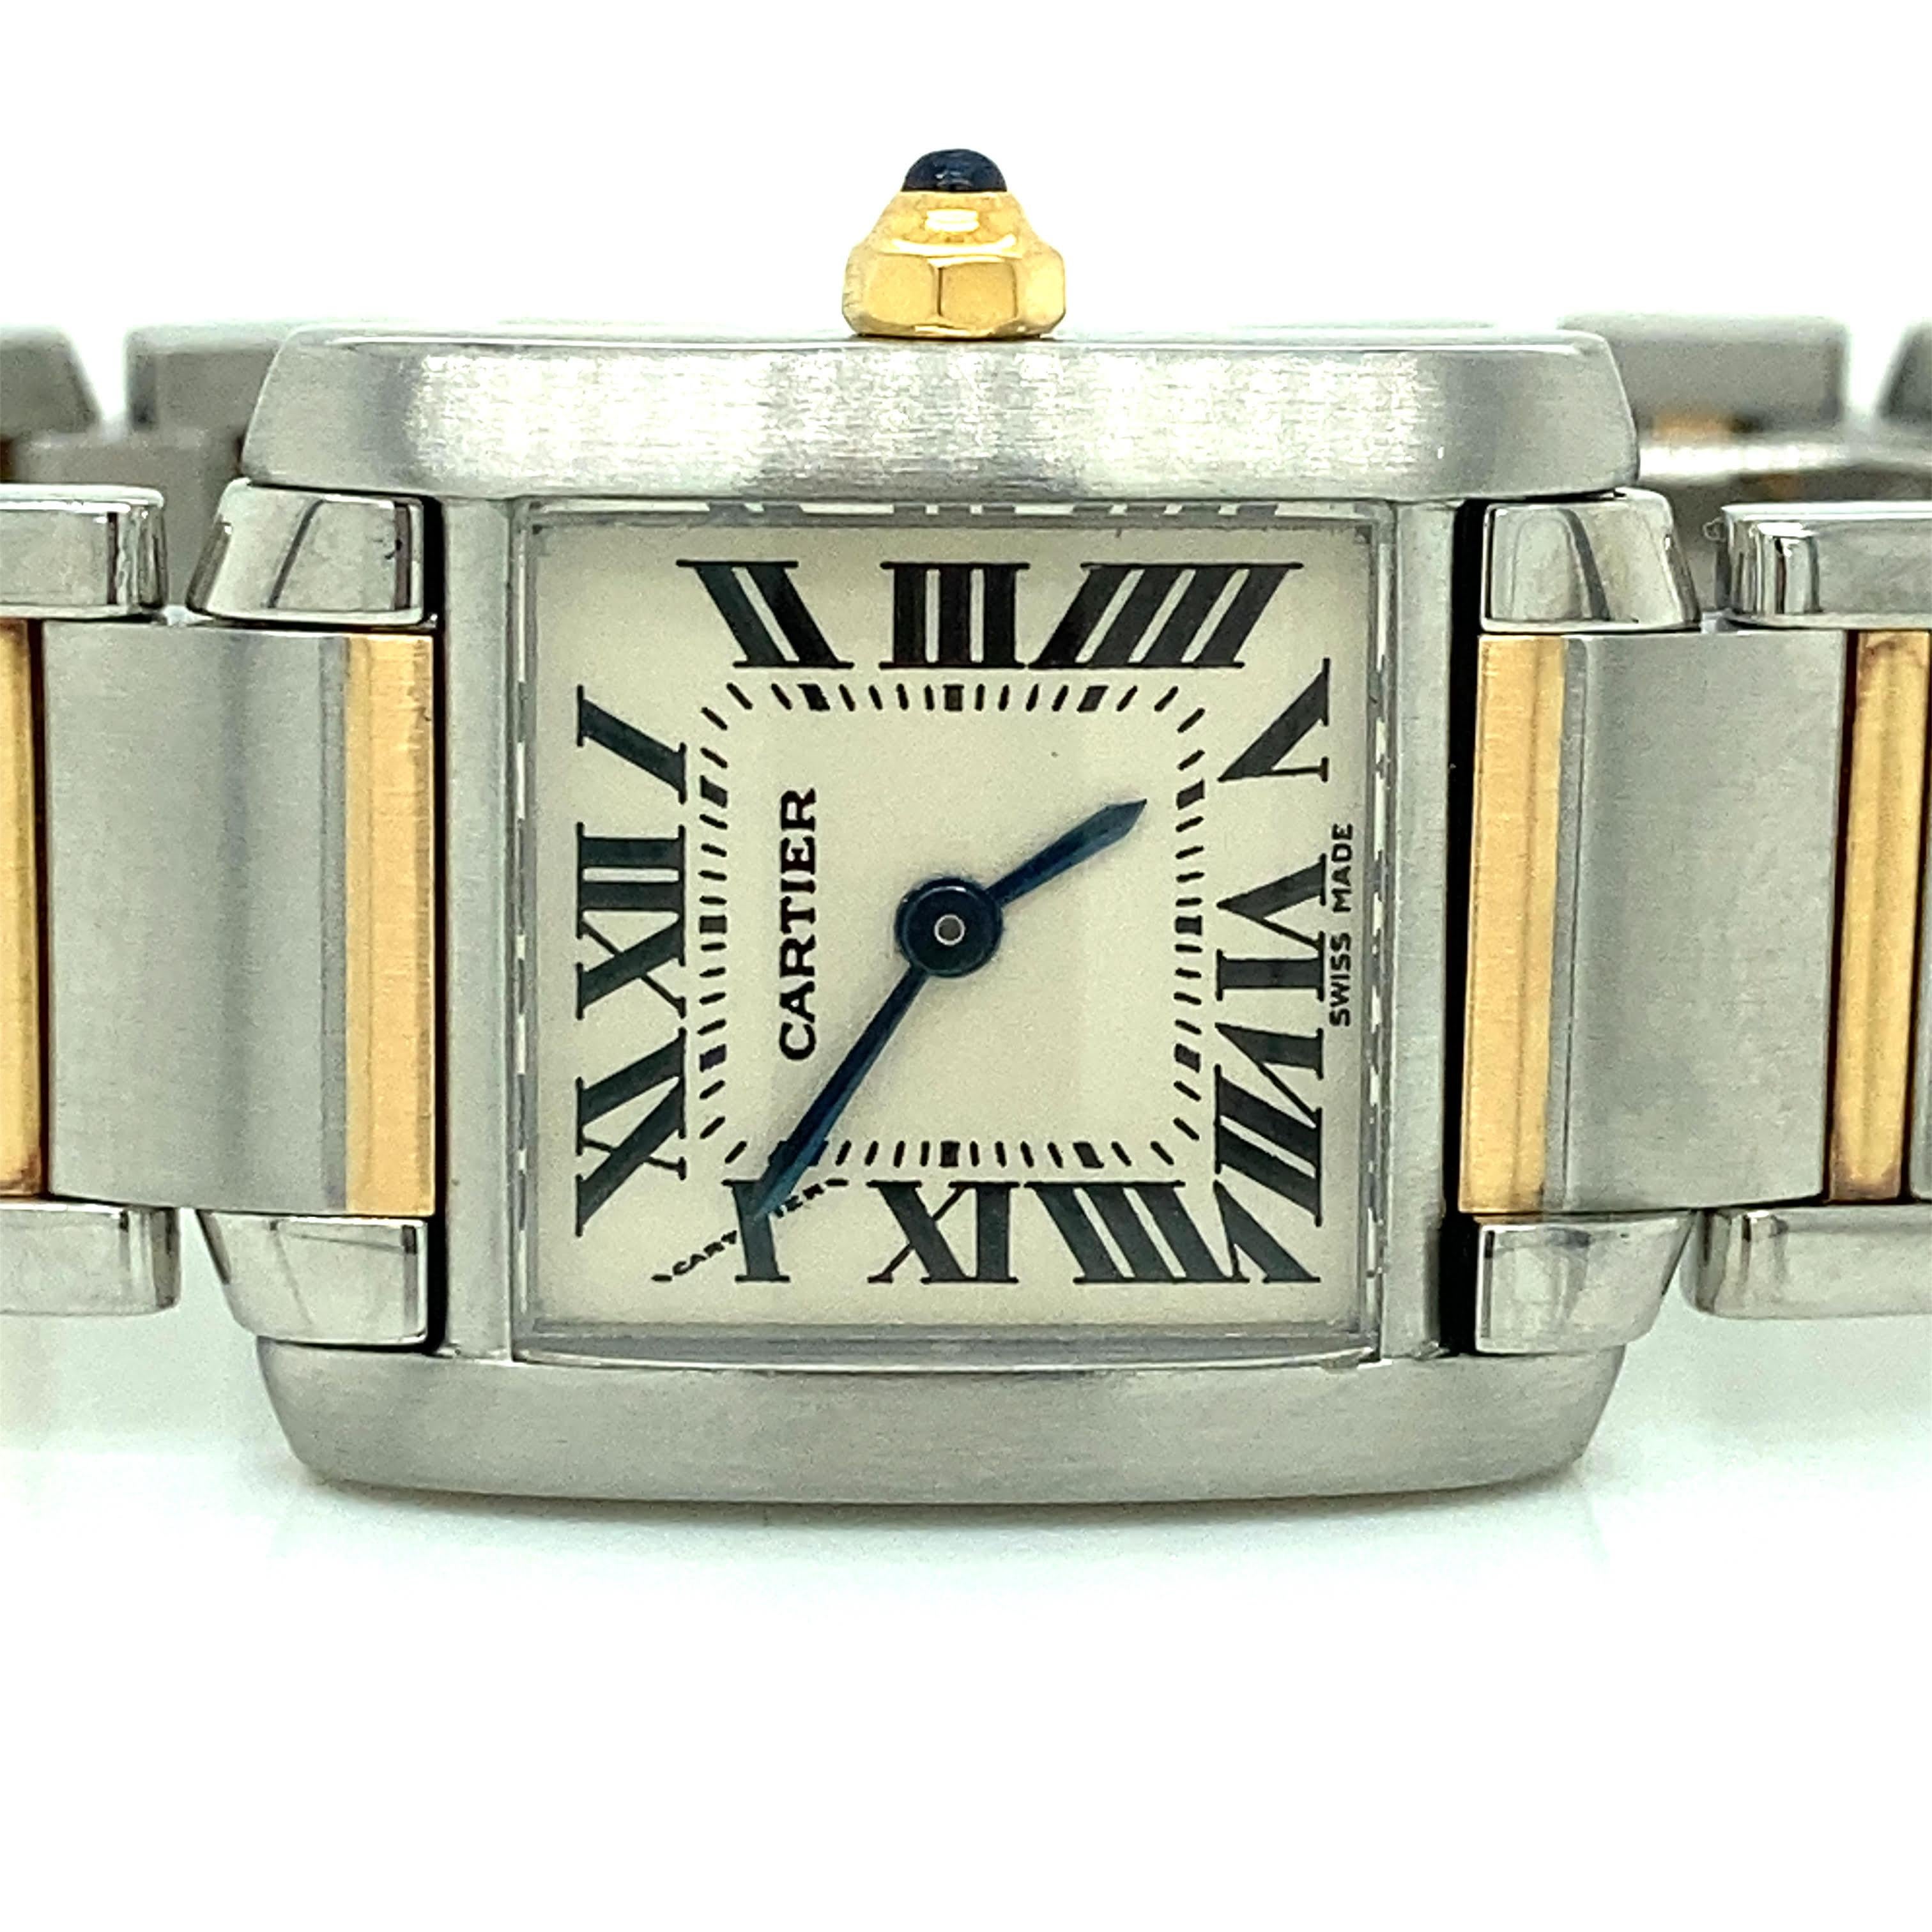 Estate Cartier Watch
Ladies
Two Tone
Good Condition